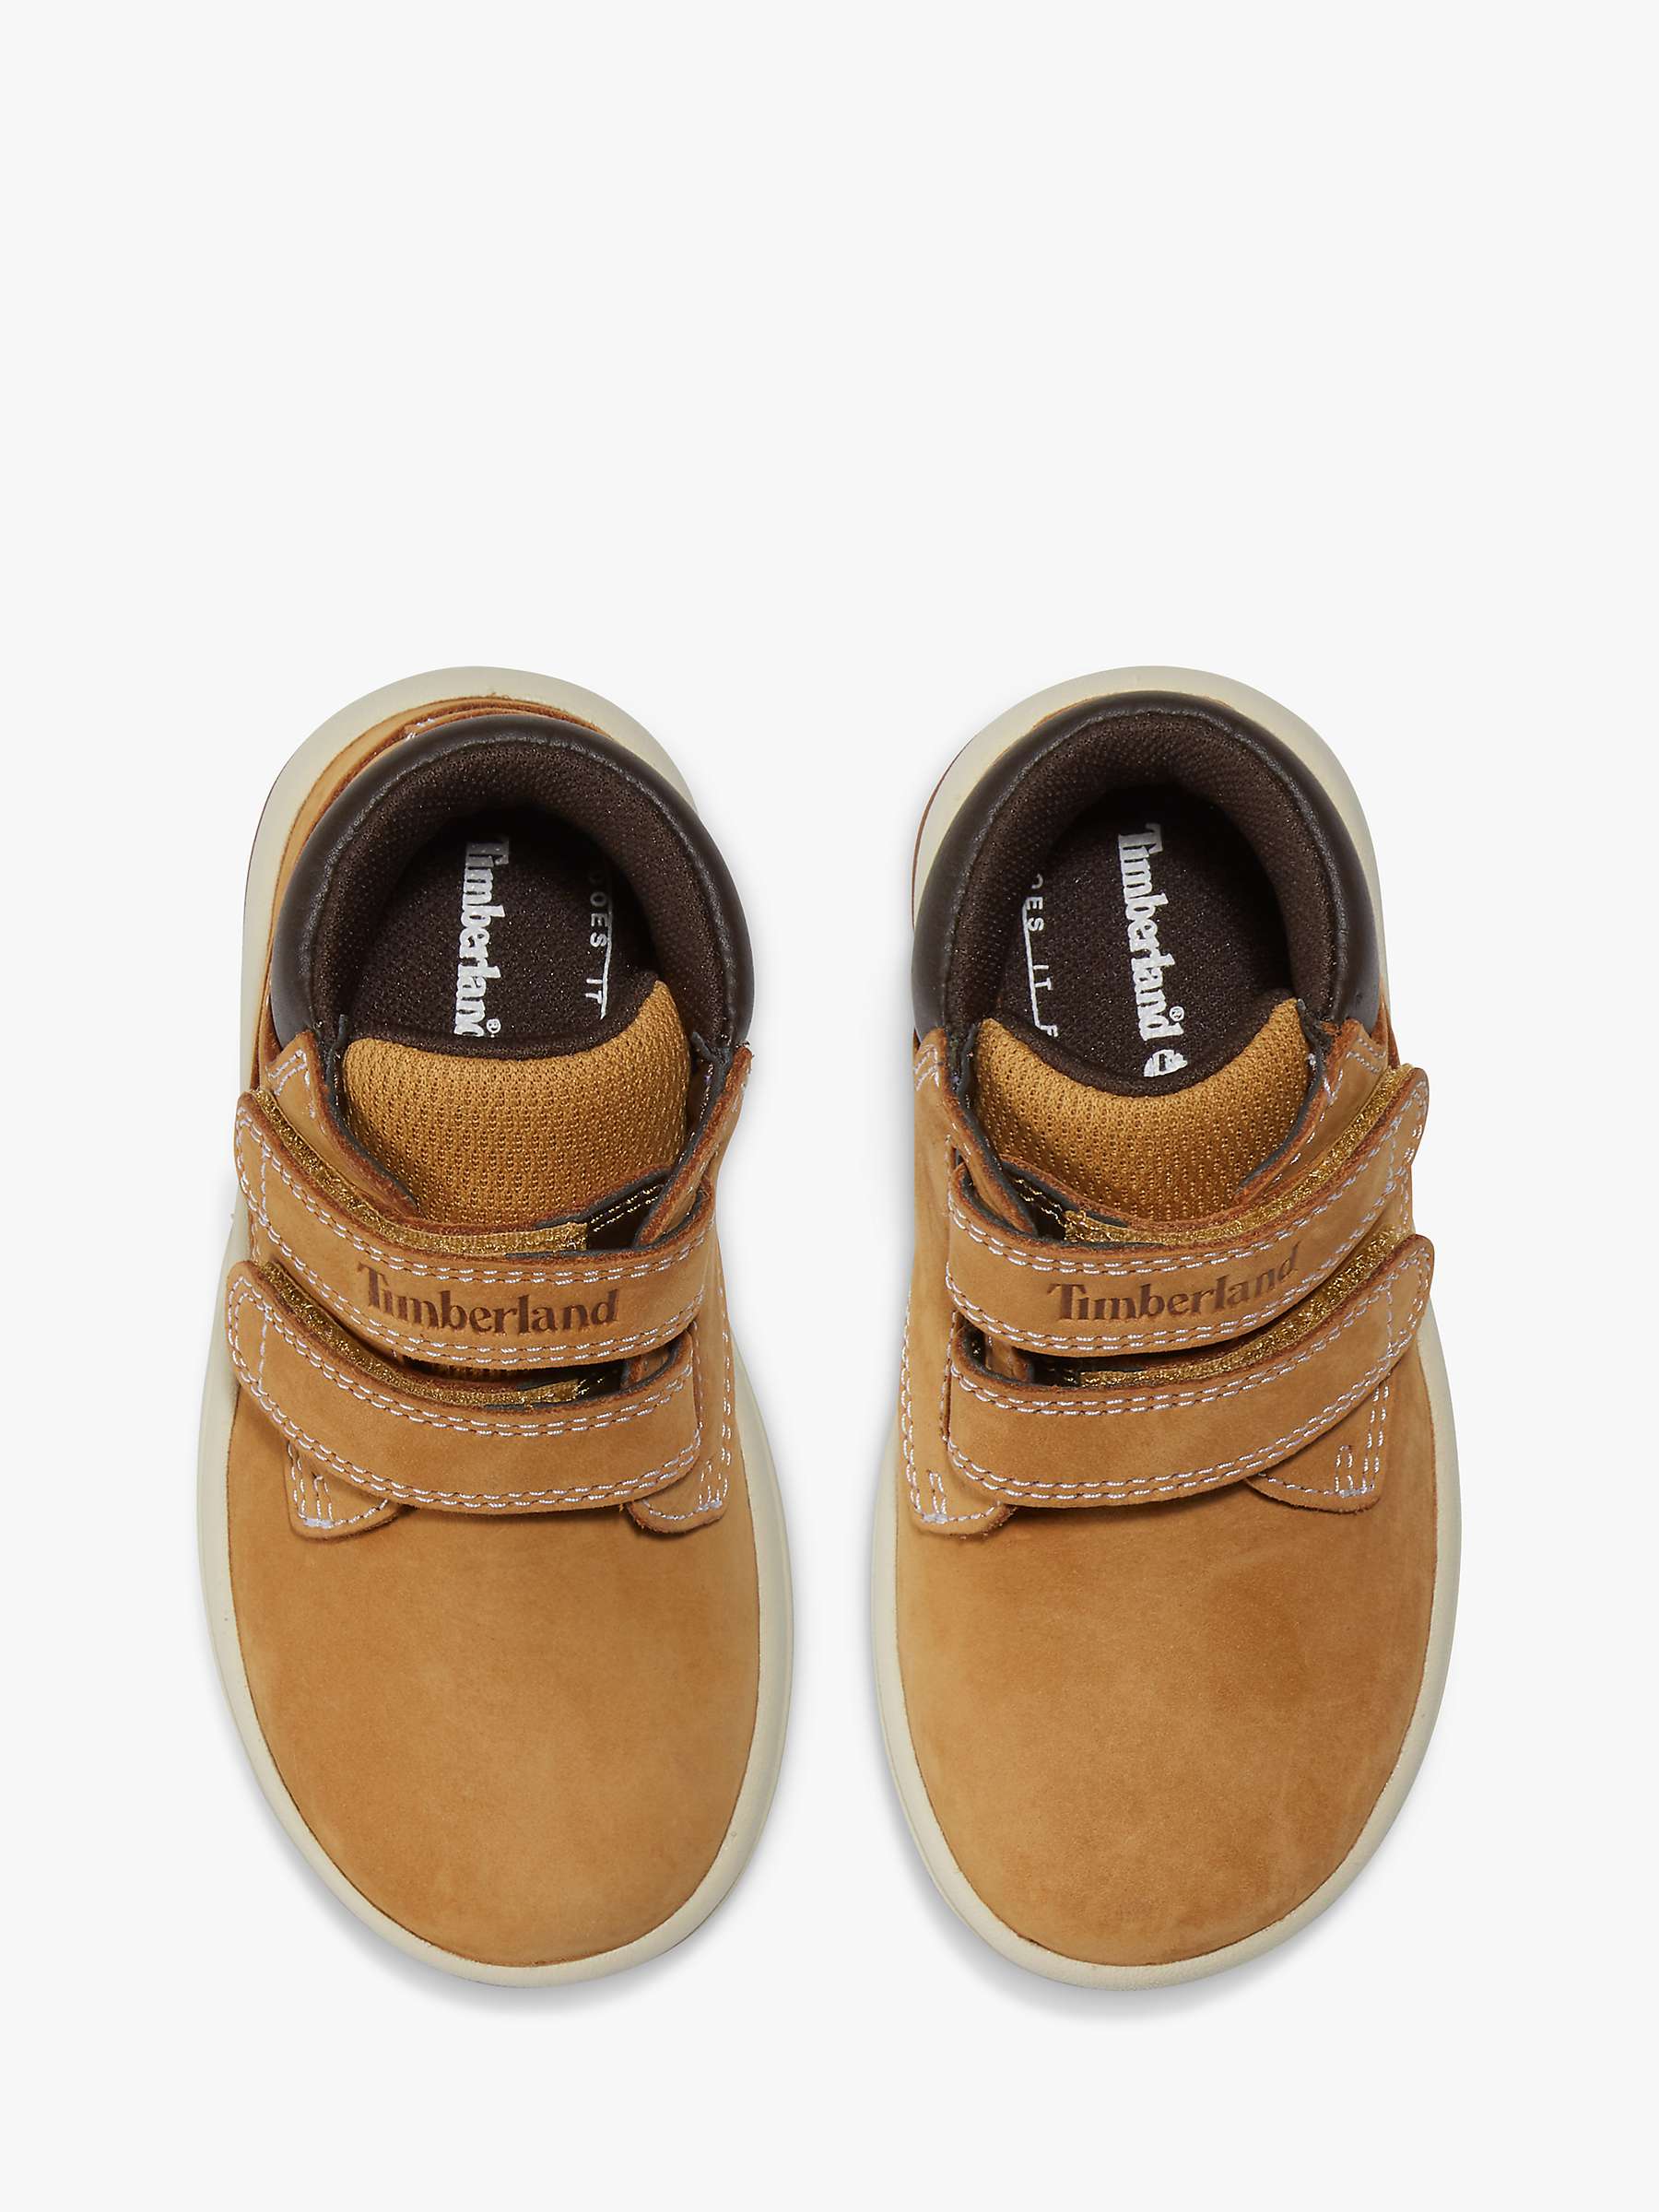 Buy Timberland Kids' Toddle Tracks High Top Trainers Online at johnlewis.com